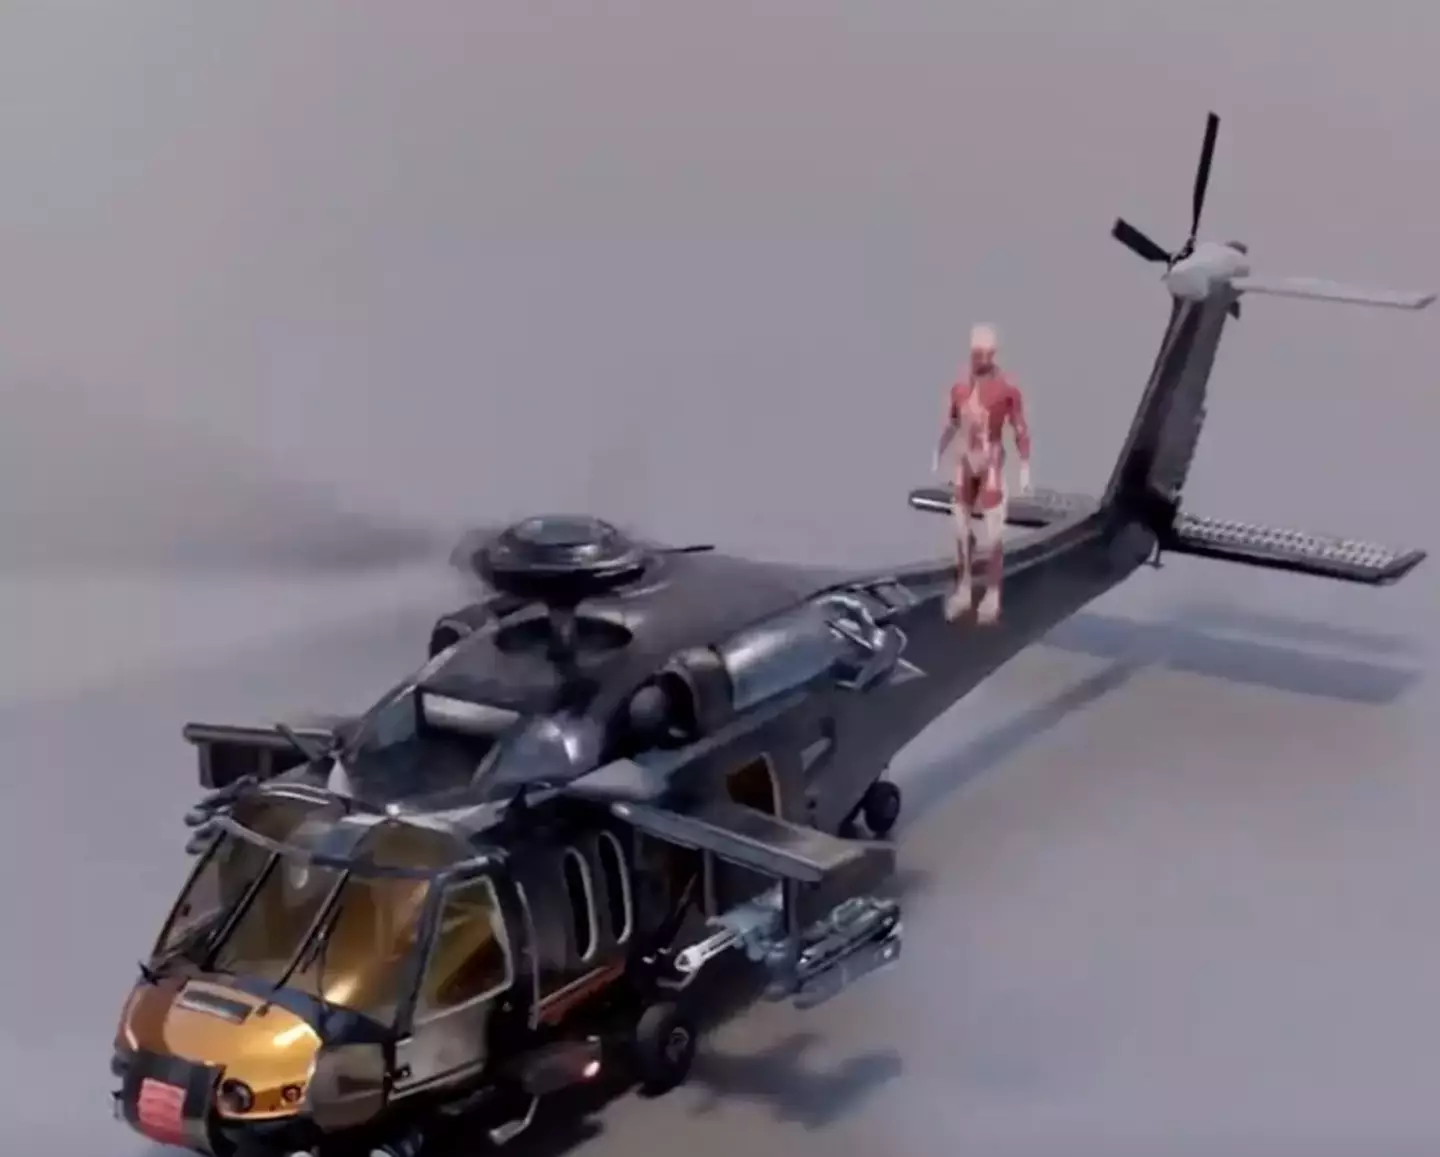 A simulation shows what happens to the human body when it falls through helicopter blades.